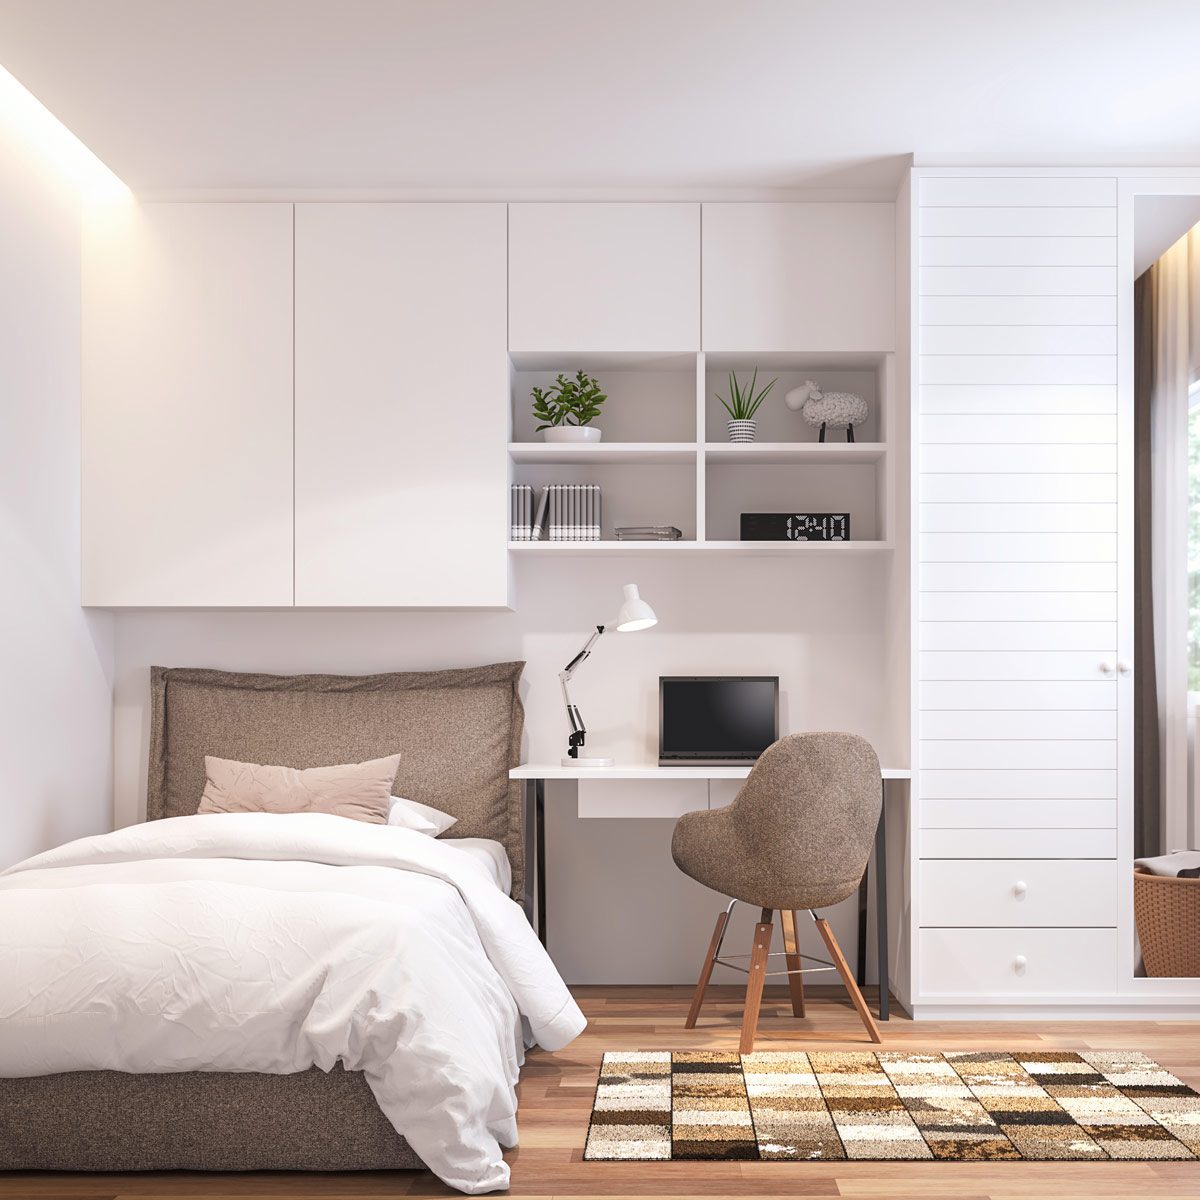 Whats Considered A Small Bedroom - BEST HOME DESIGN IDEAS